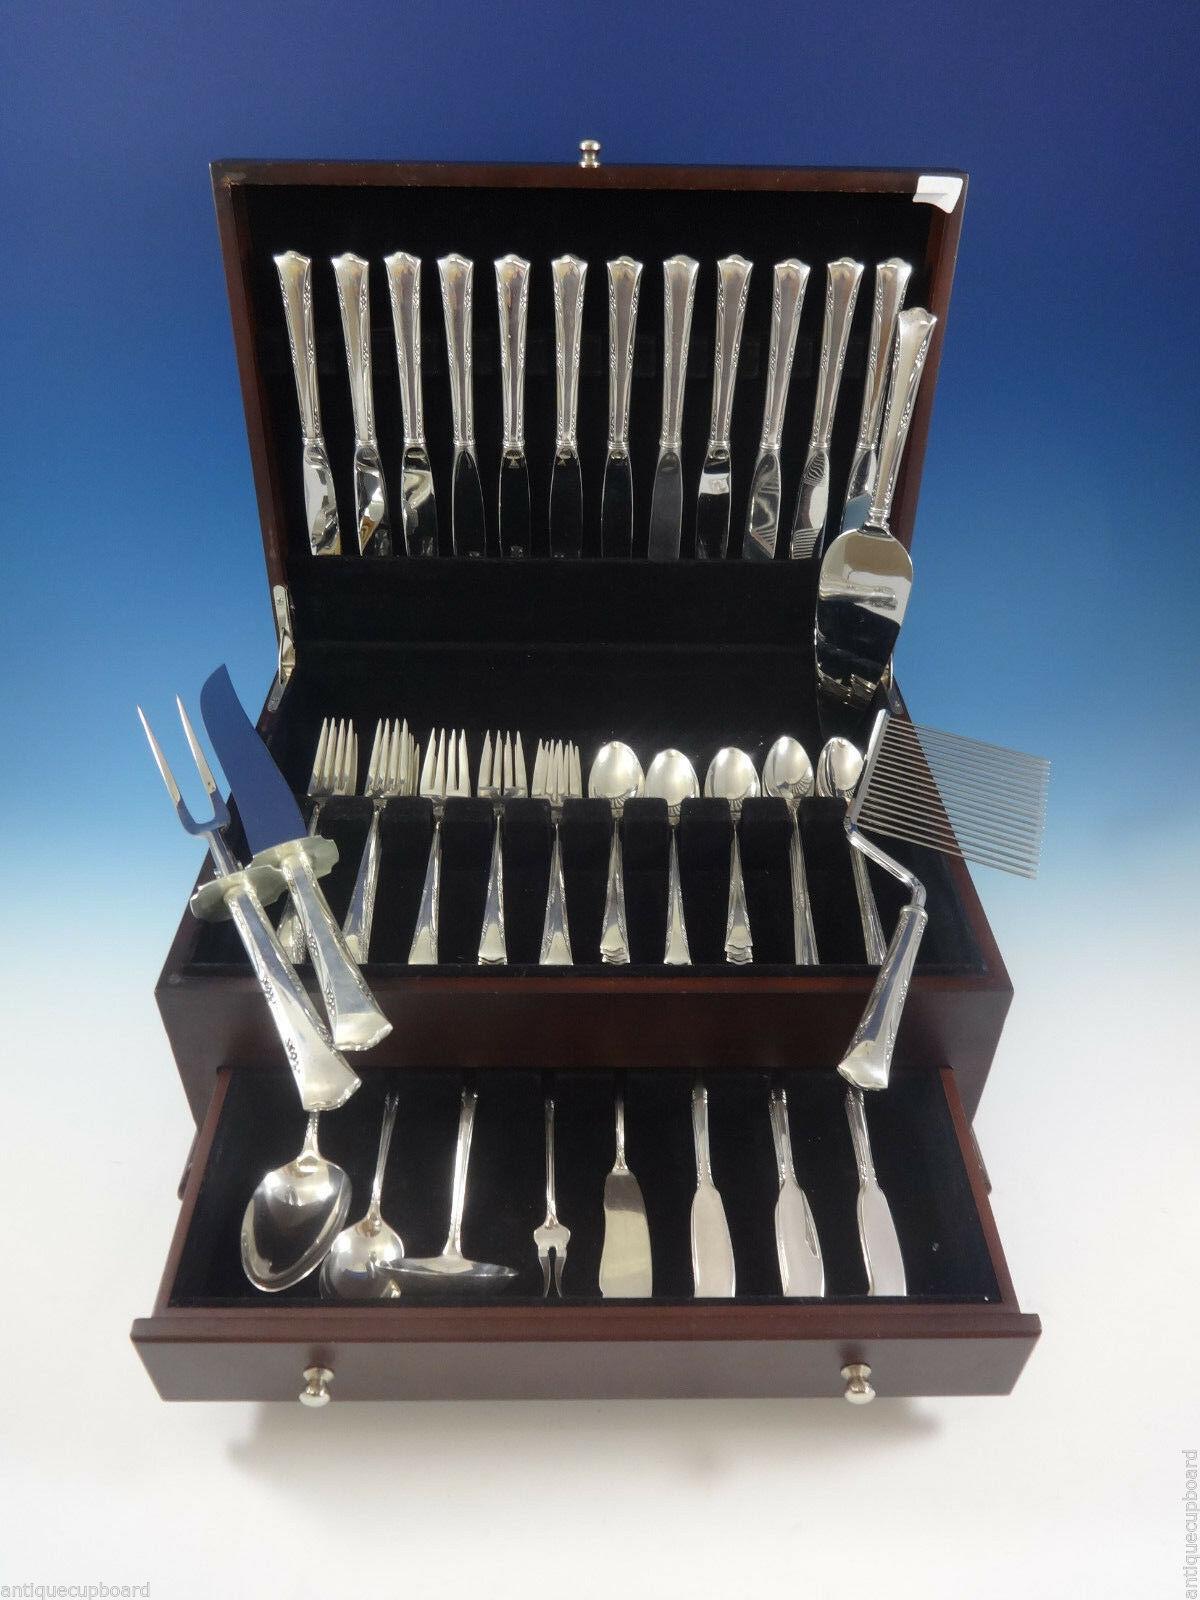 Greenbrier by Gorham sterling silver flatware set, 81 pieces. This set includes:

12 knives, 8 7/8